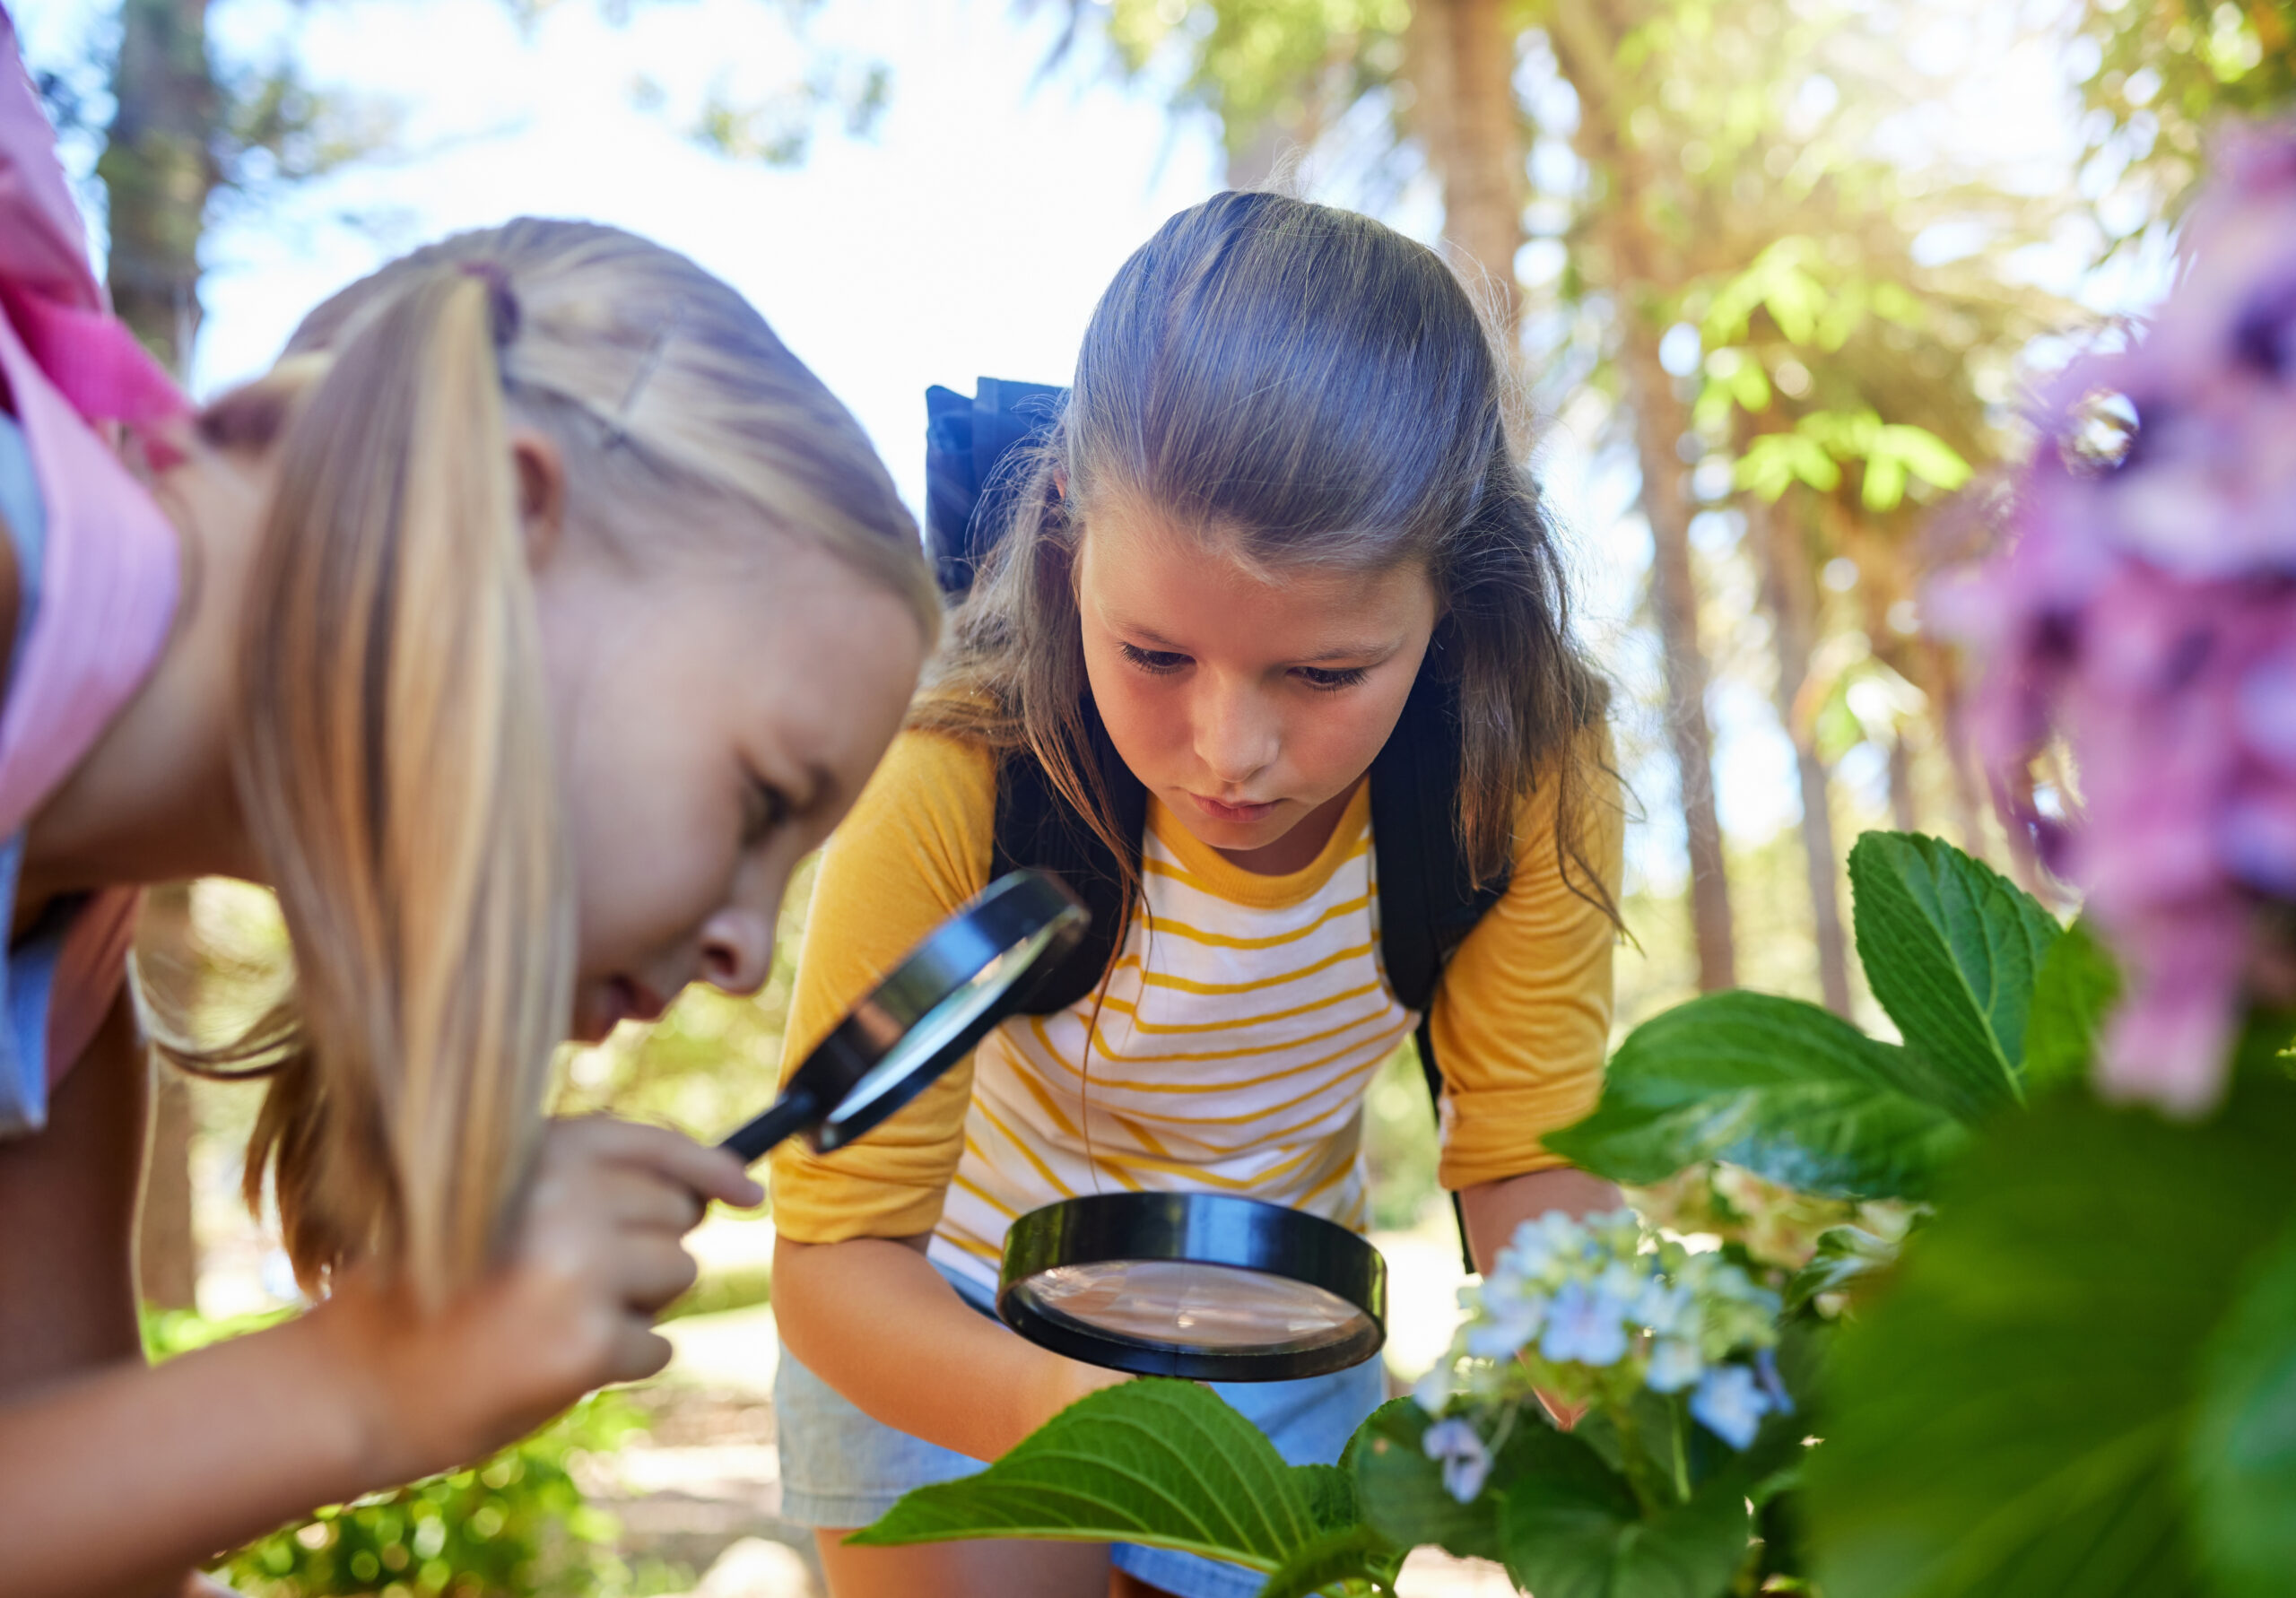 Learning, magnifying glass and girls with leaf outdoor for looking at plants together. Education, children and magnifier lens to look at flowers exploring nature, forest or garden on school trip